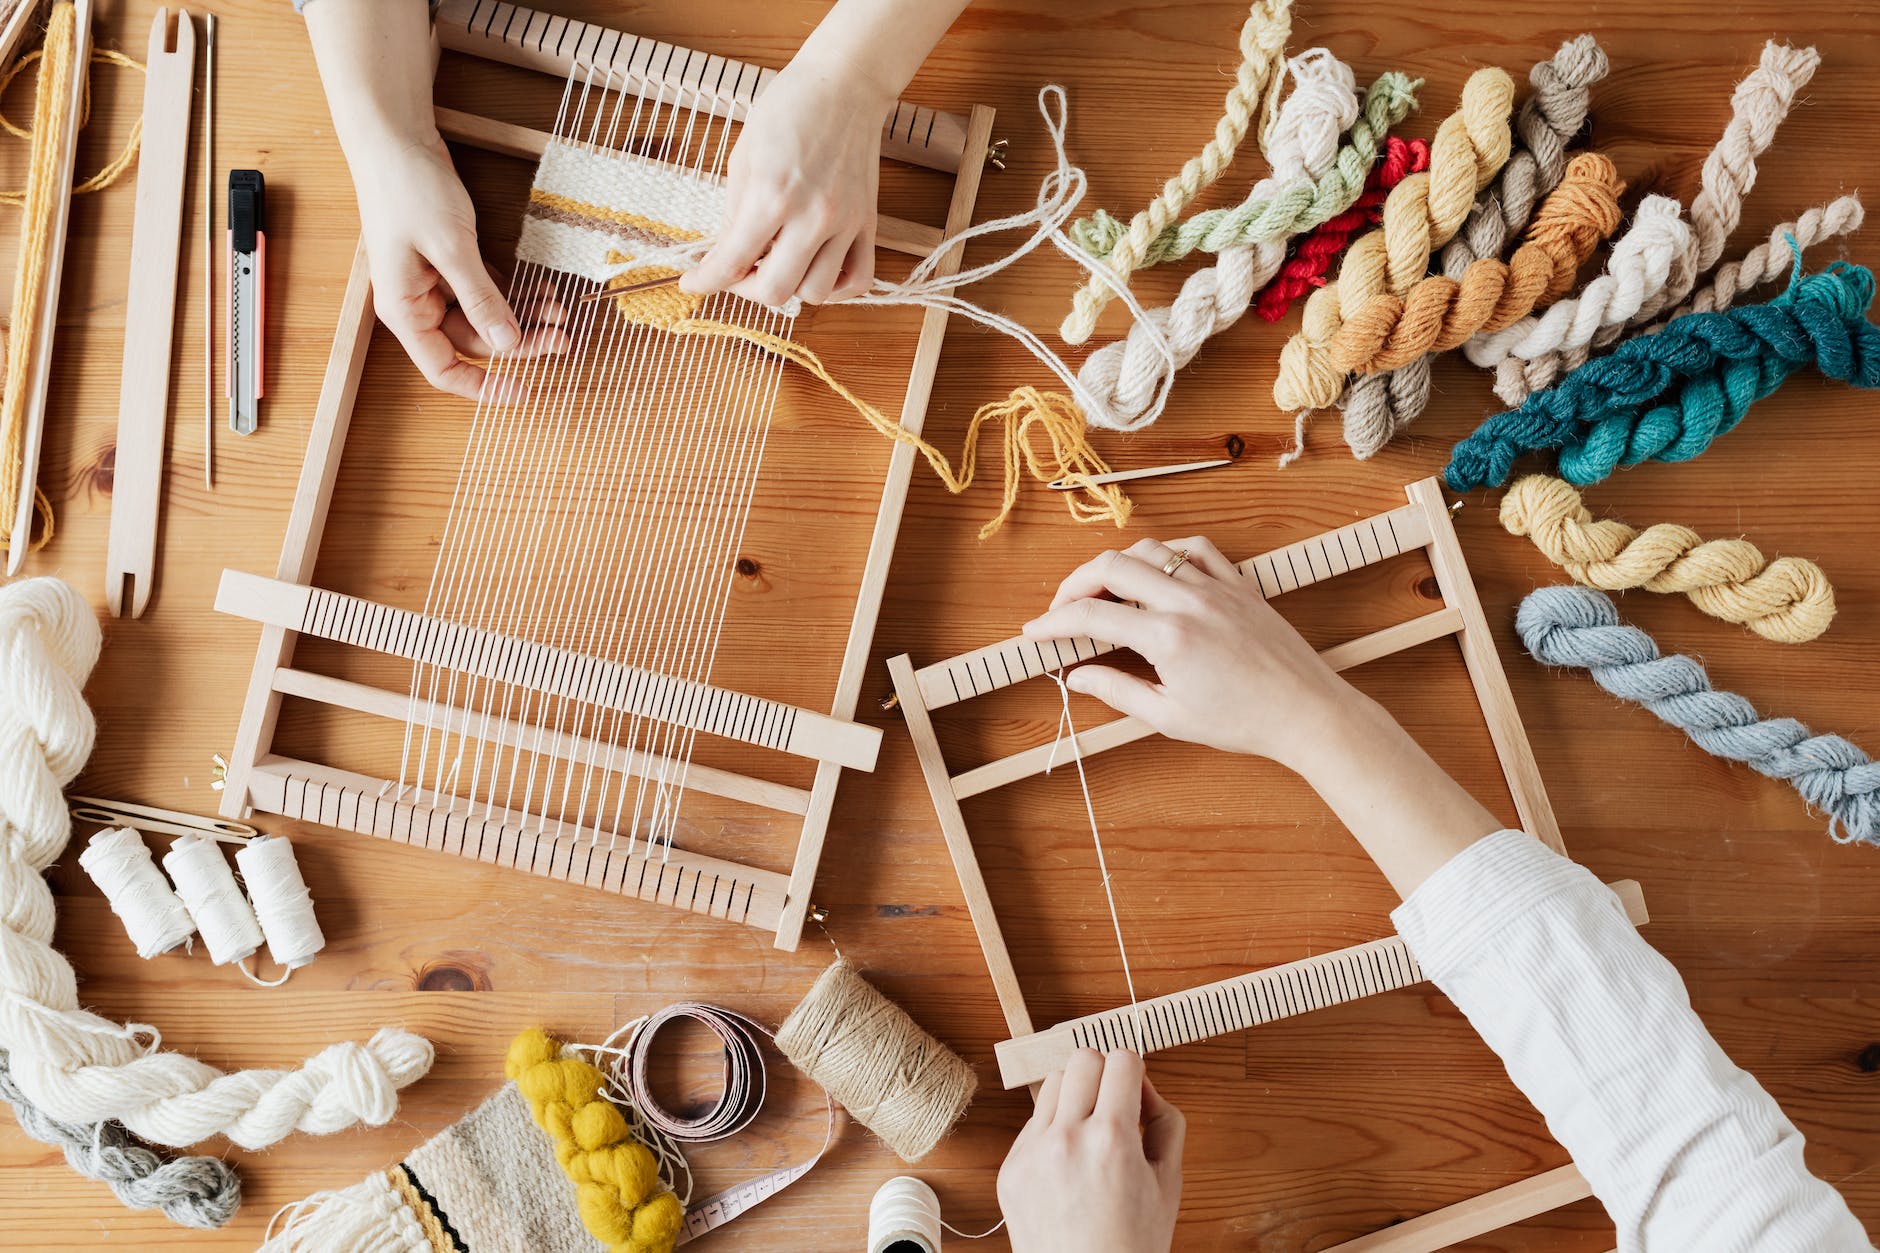 top view photo of two person s hands weaving, idea for DIY decor and crafts that make money